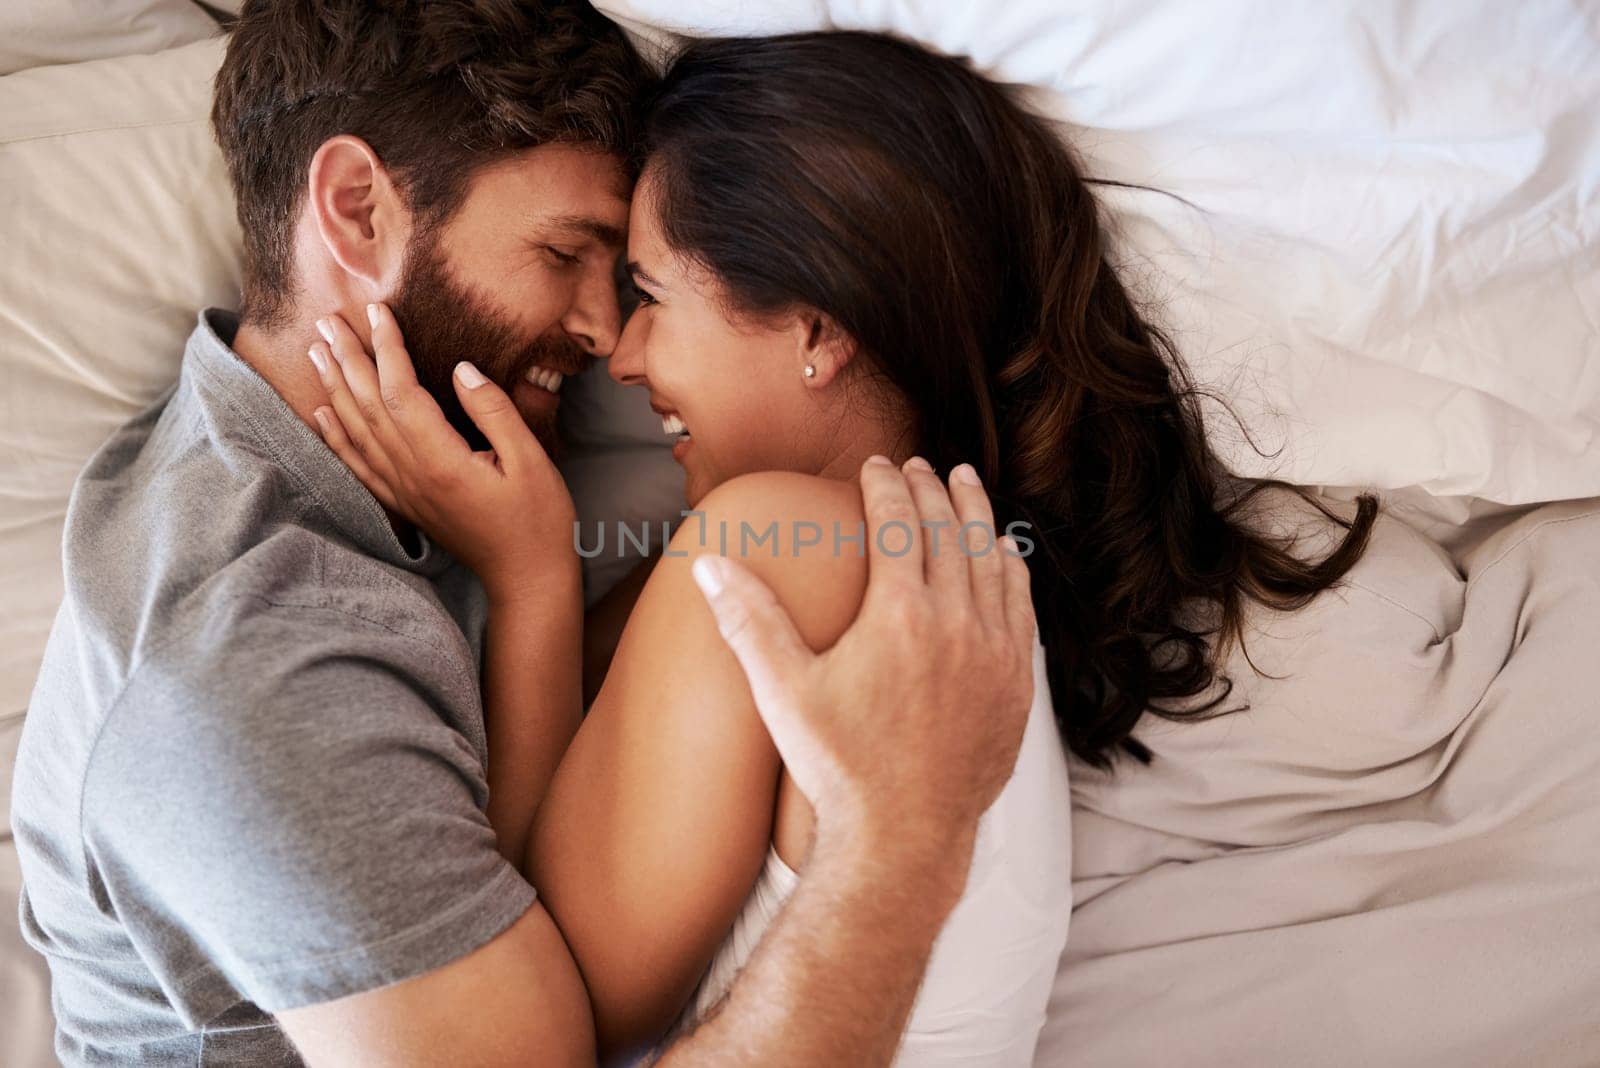 Morning, bedroom hug and happy couple laugh at funny joke, relationship humor or comedy on honeymoon vacation. Affection, marriage and top view of relax man, woman or bonding people laughing in bed by YuriArcurs